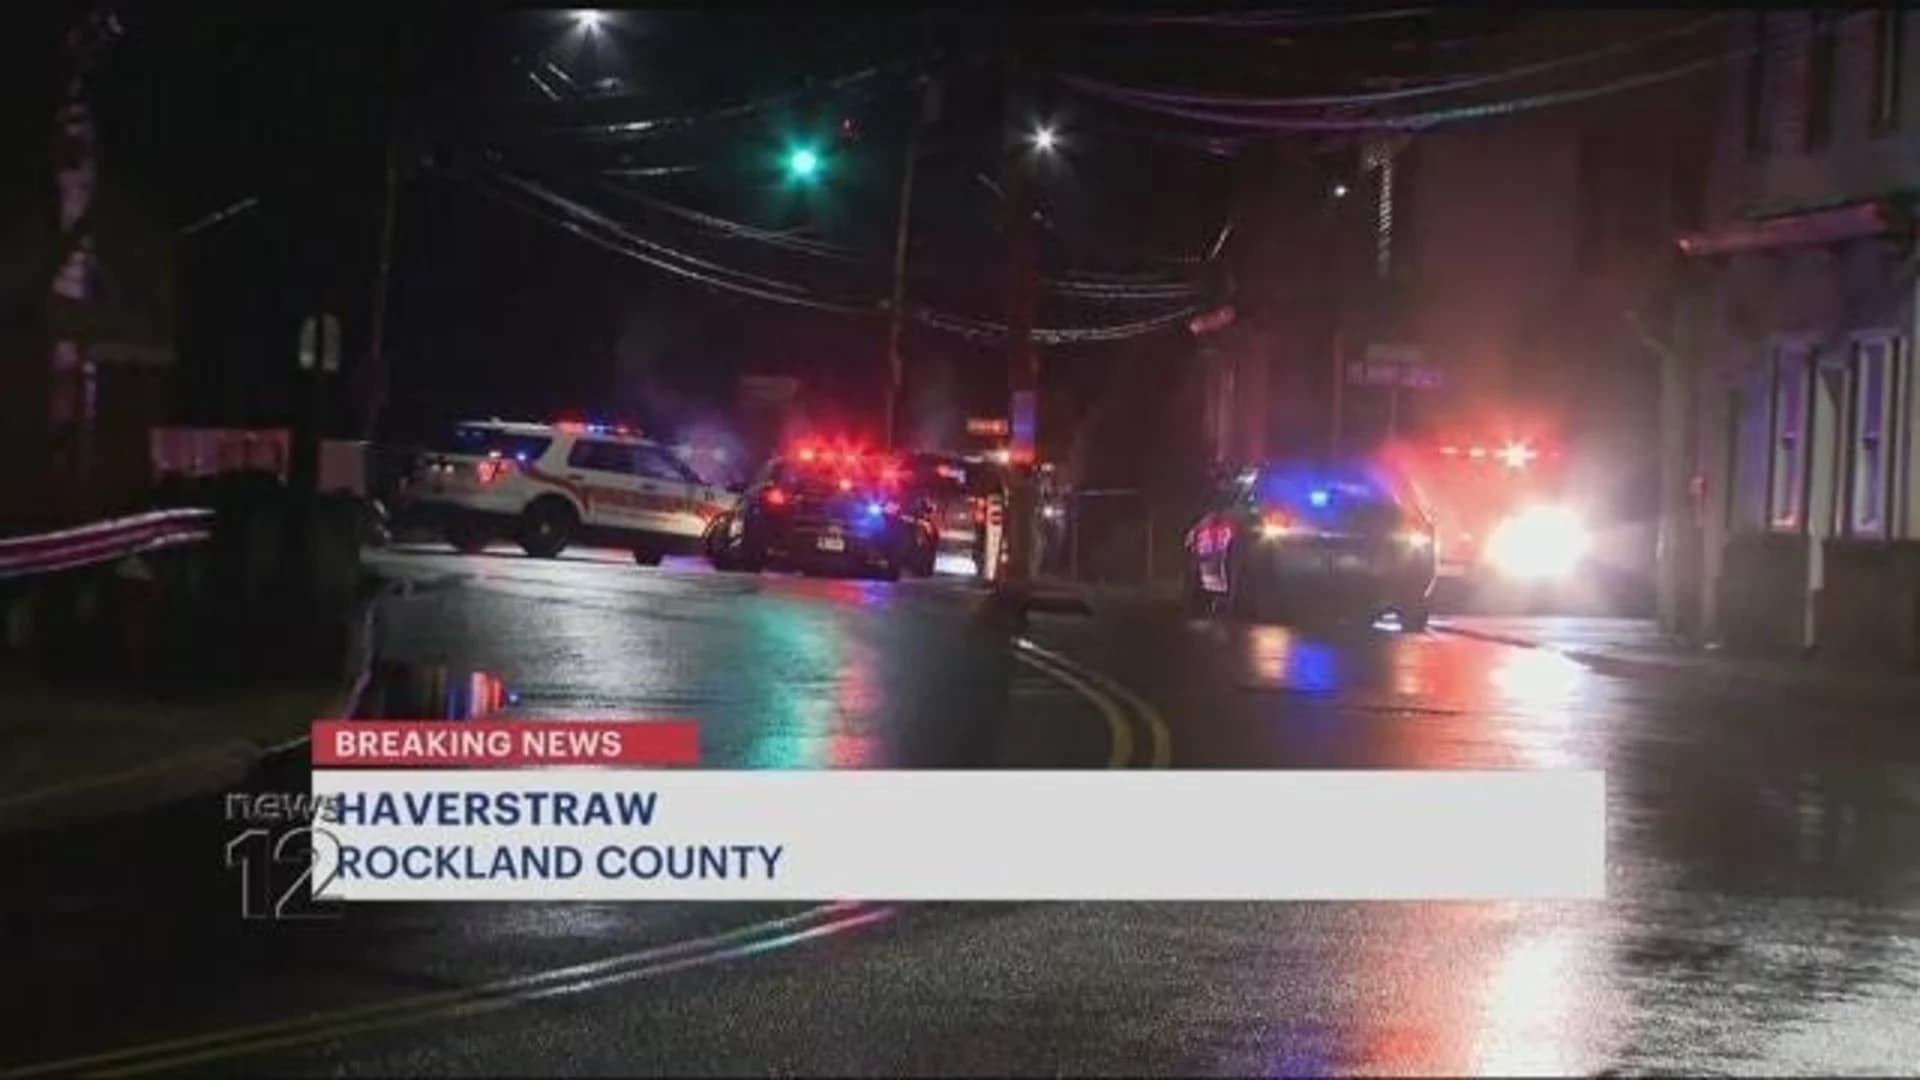 Police respond to shooting near Haverstraw funeral home